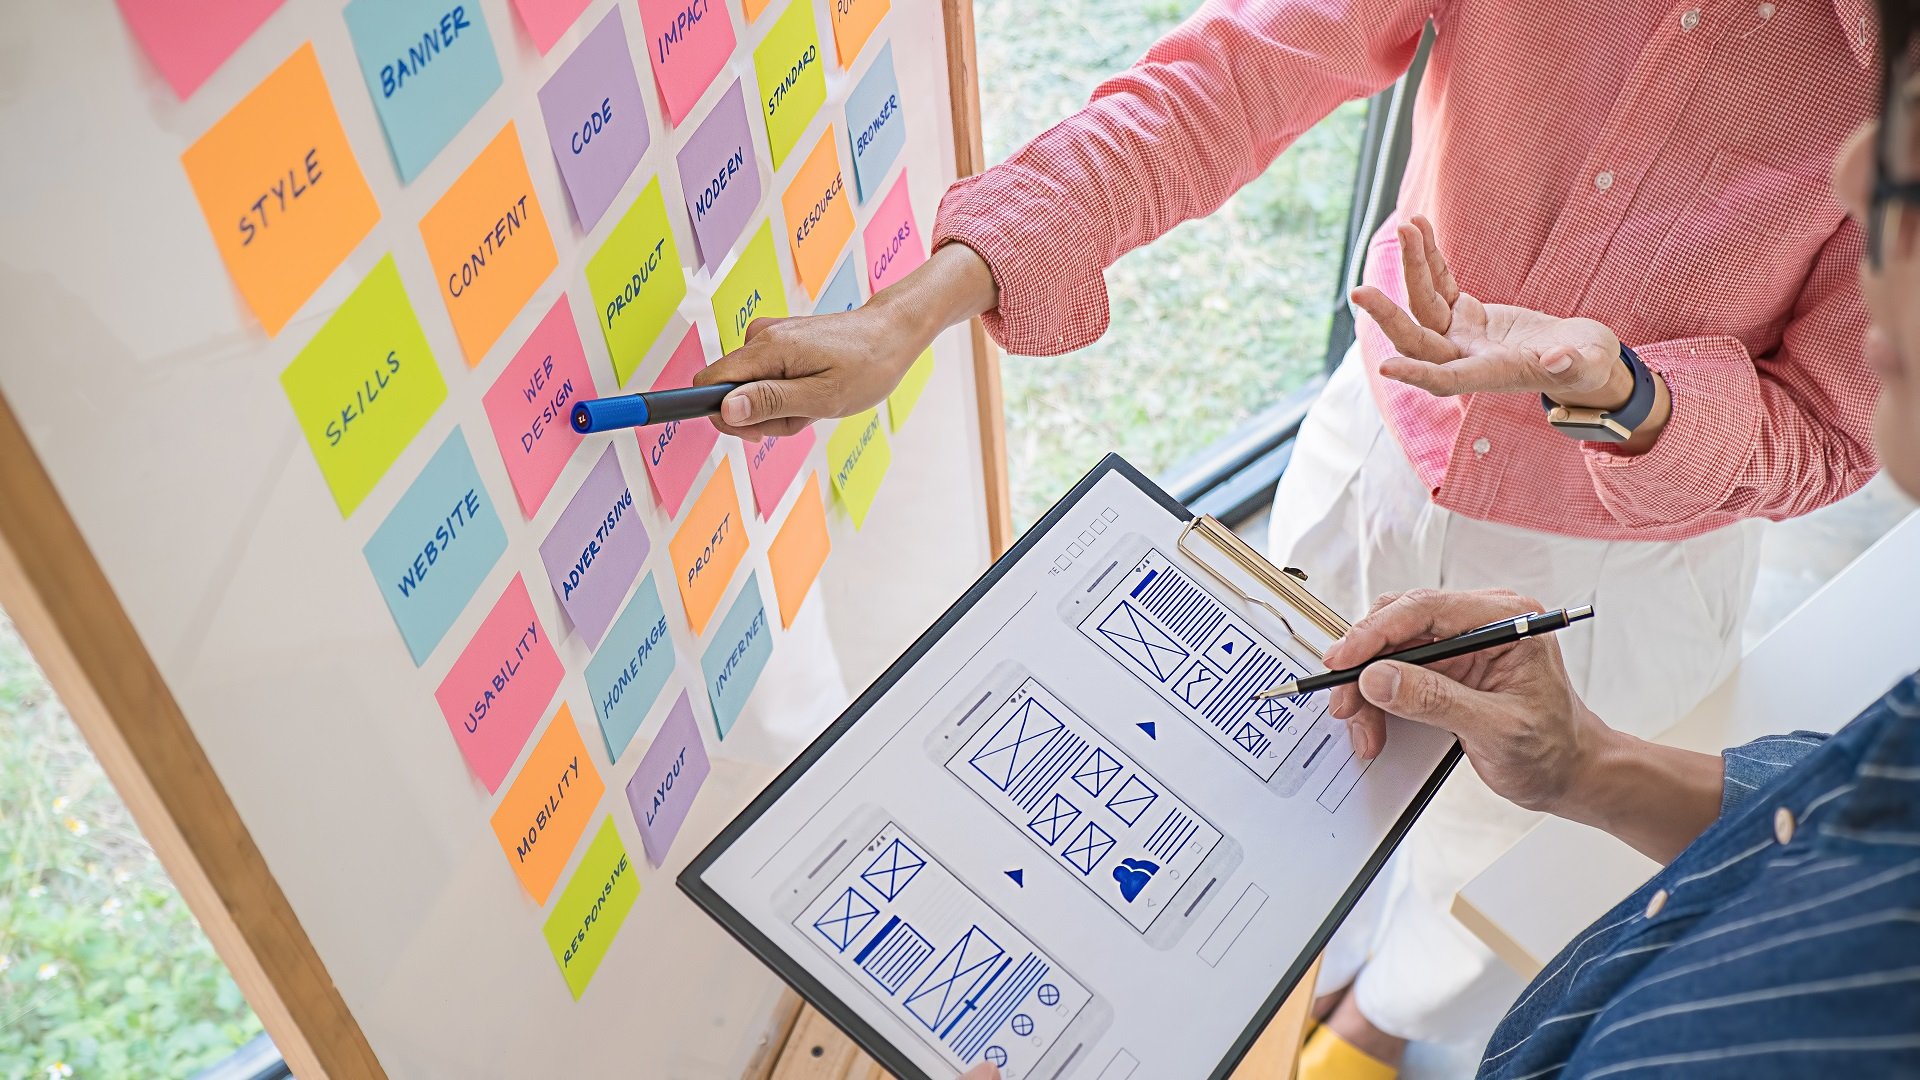 web-designer-brainstorming-for-strategy-plan-colorful-sticky-notes-with-things-to-do-on-office-board-user-experience-ux-concept